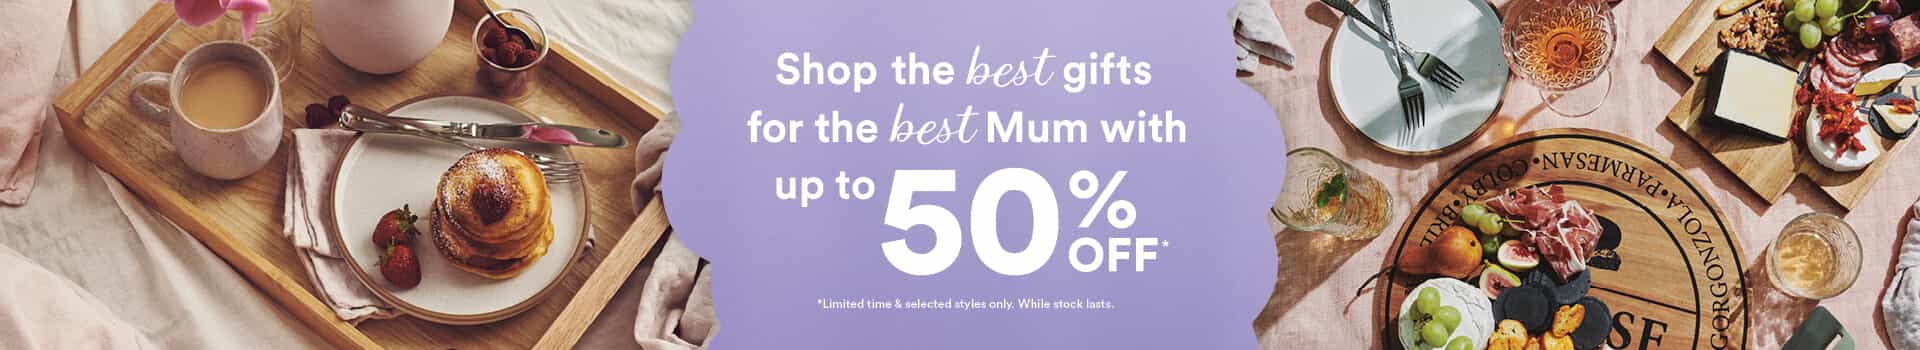 Salt&pepper up to 50% OFF on Mum gifts including kitchenware, glassware & more